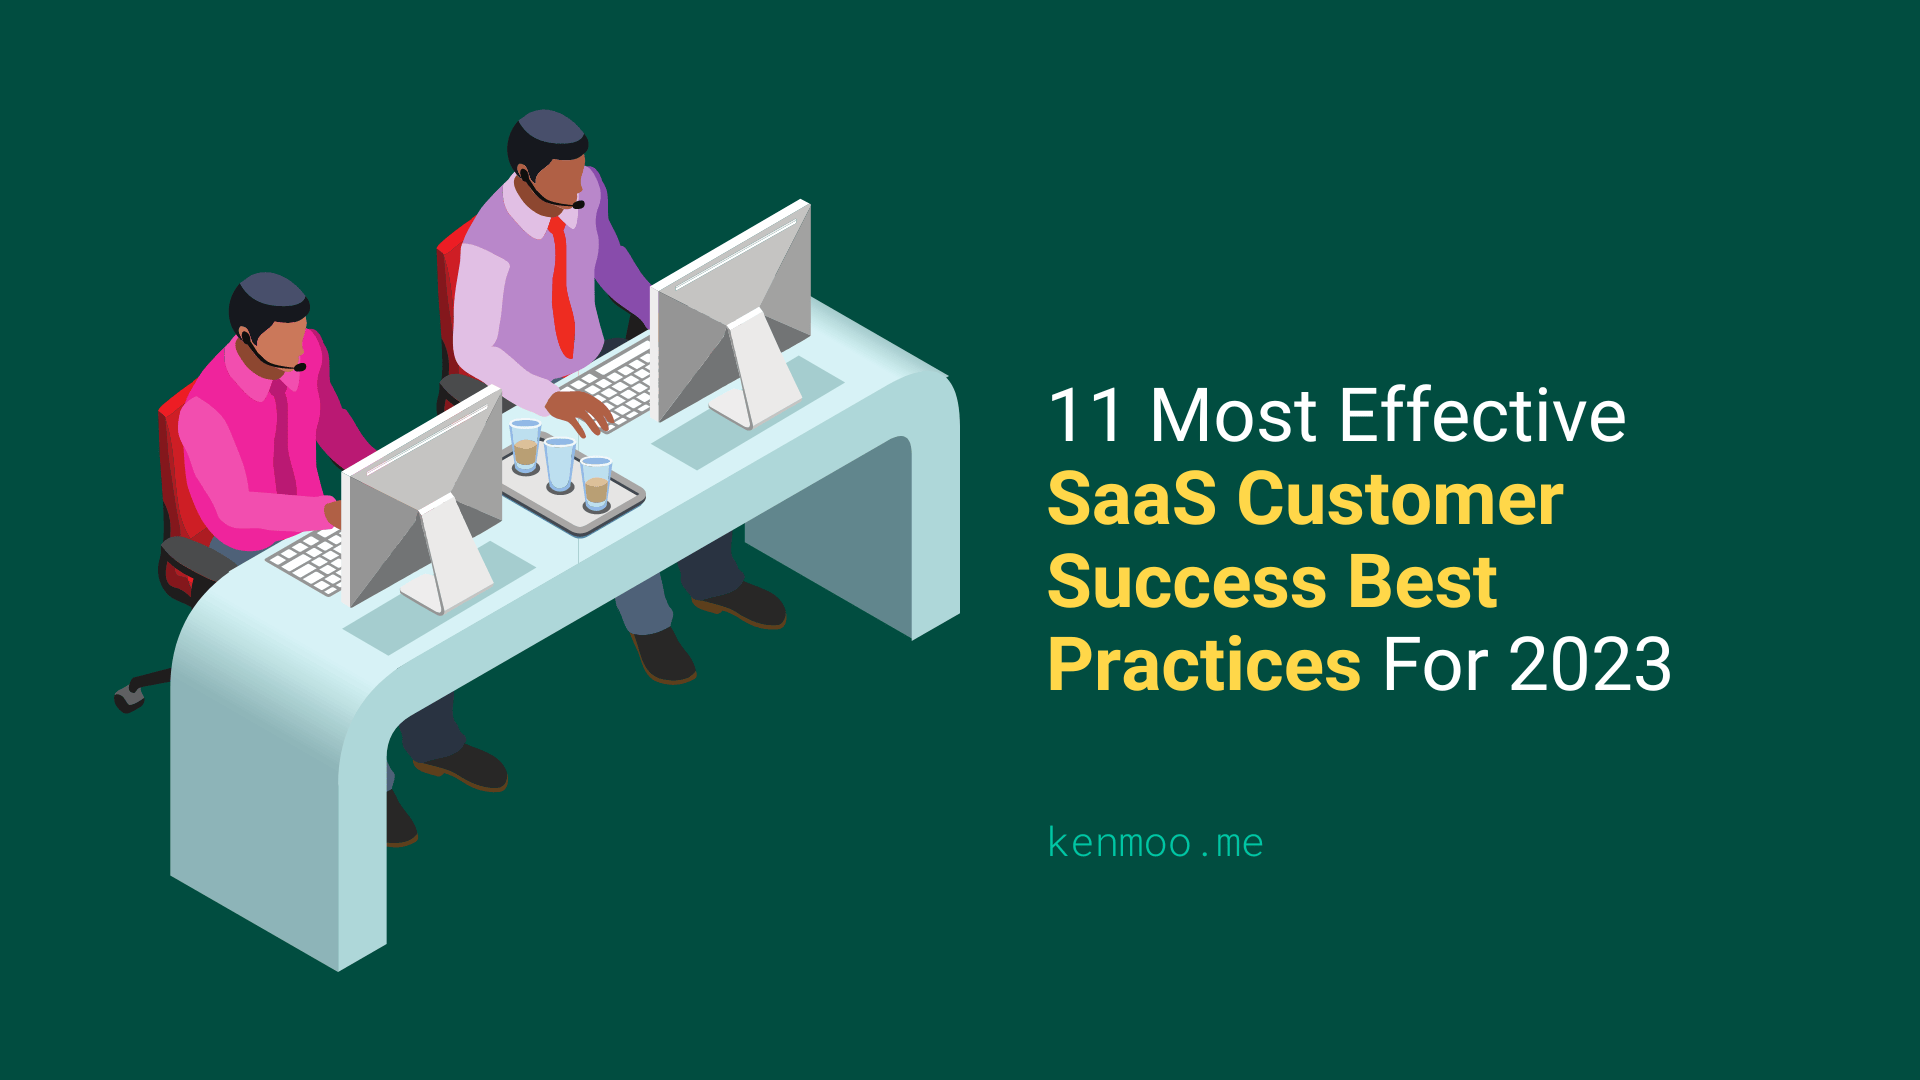 11 Most Effective SaaS Customer Success Best Practices For 2023